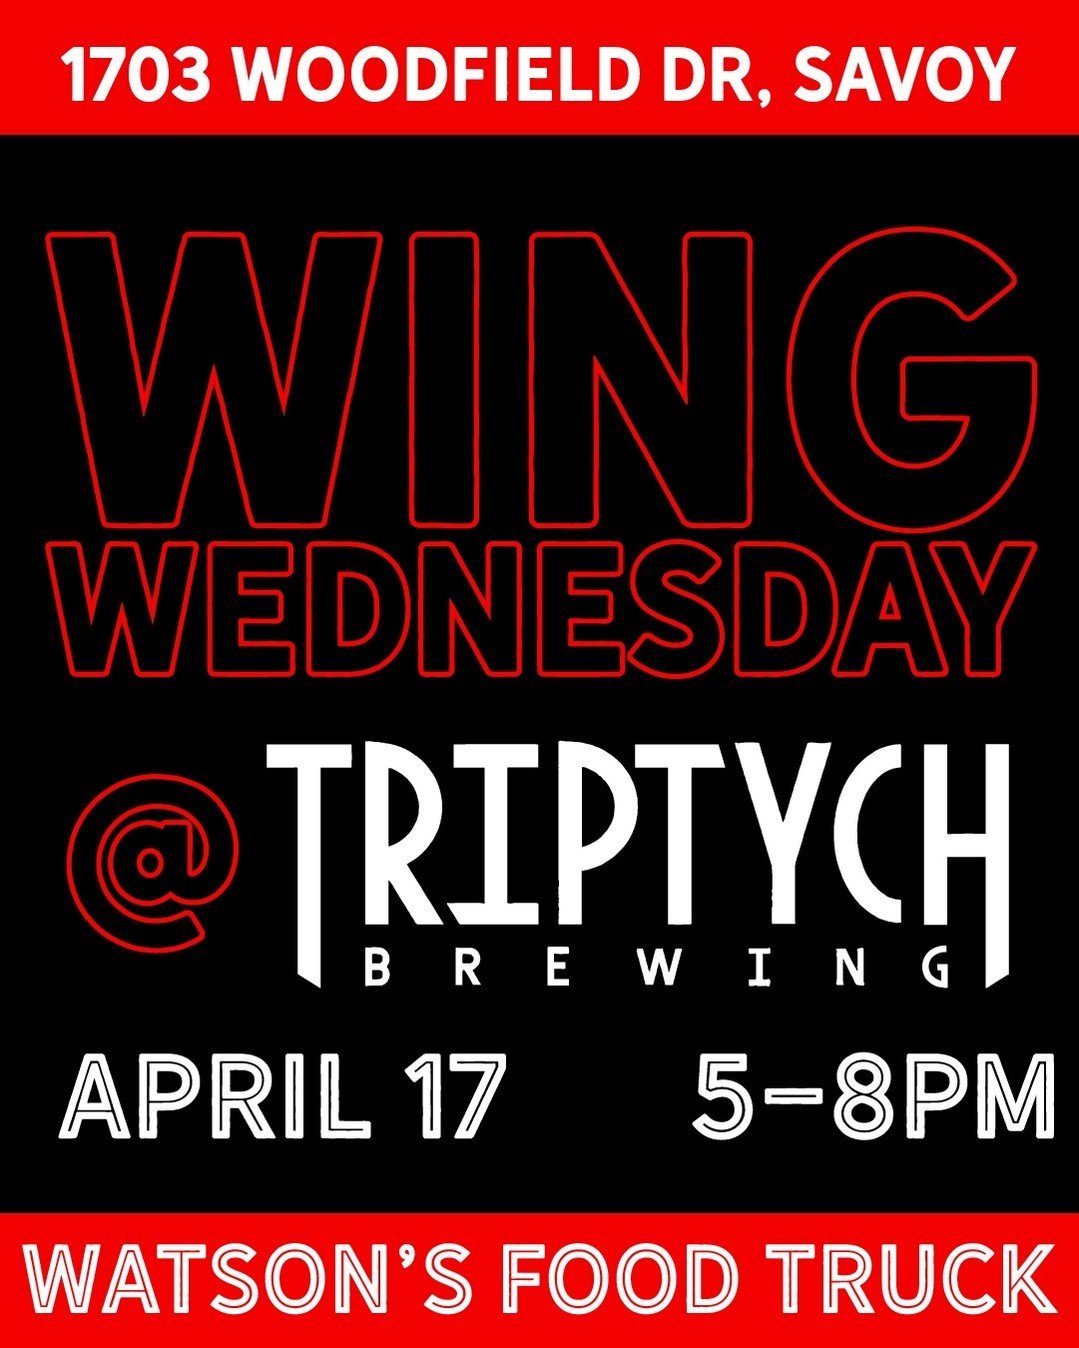 Looking like a beautiful day for #WingWednesday at @triptychbrewing!